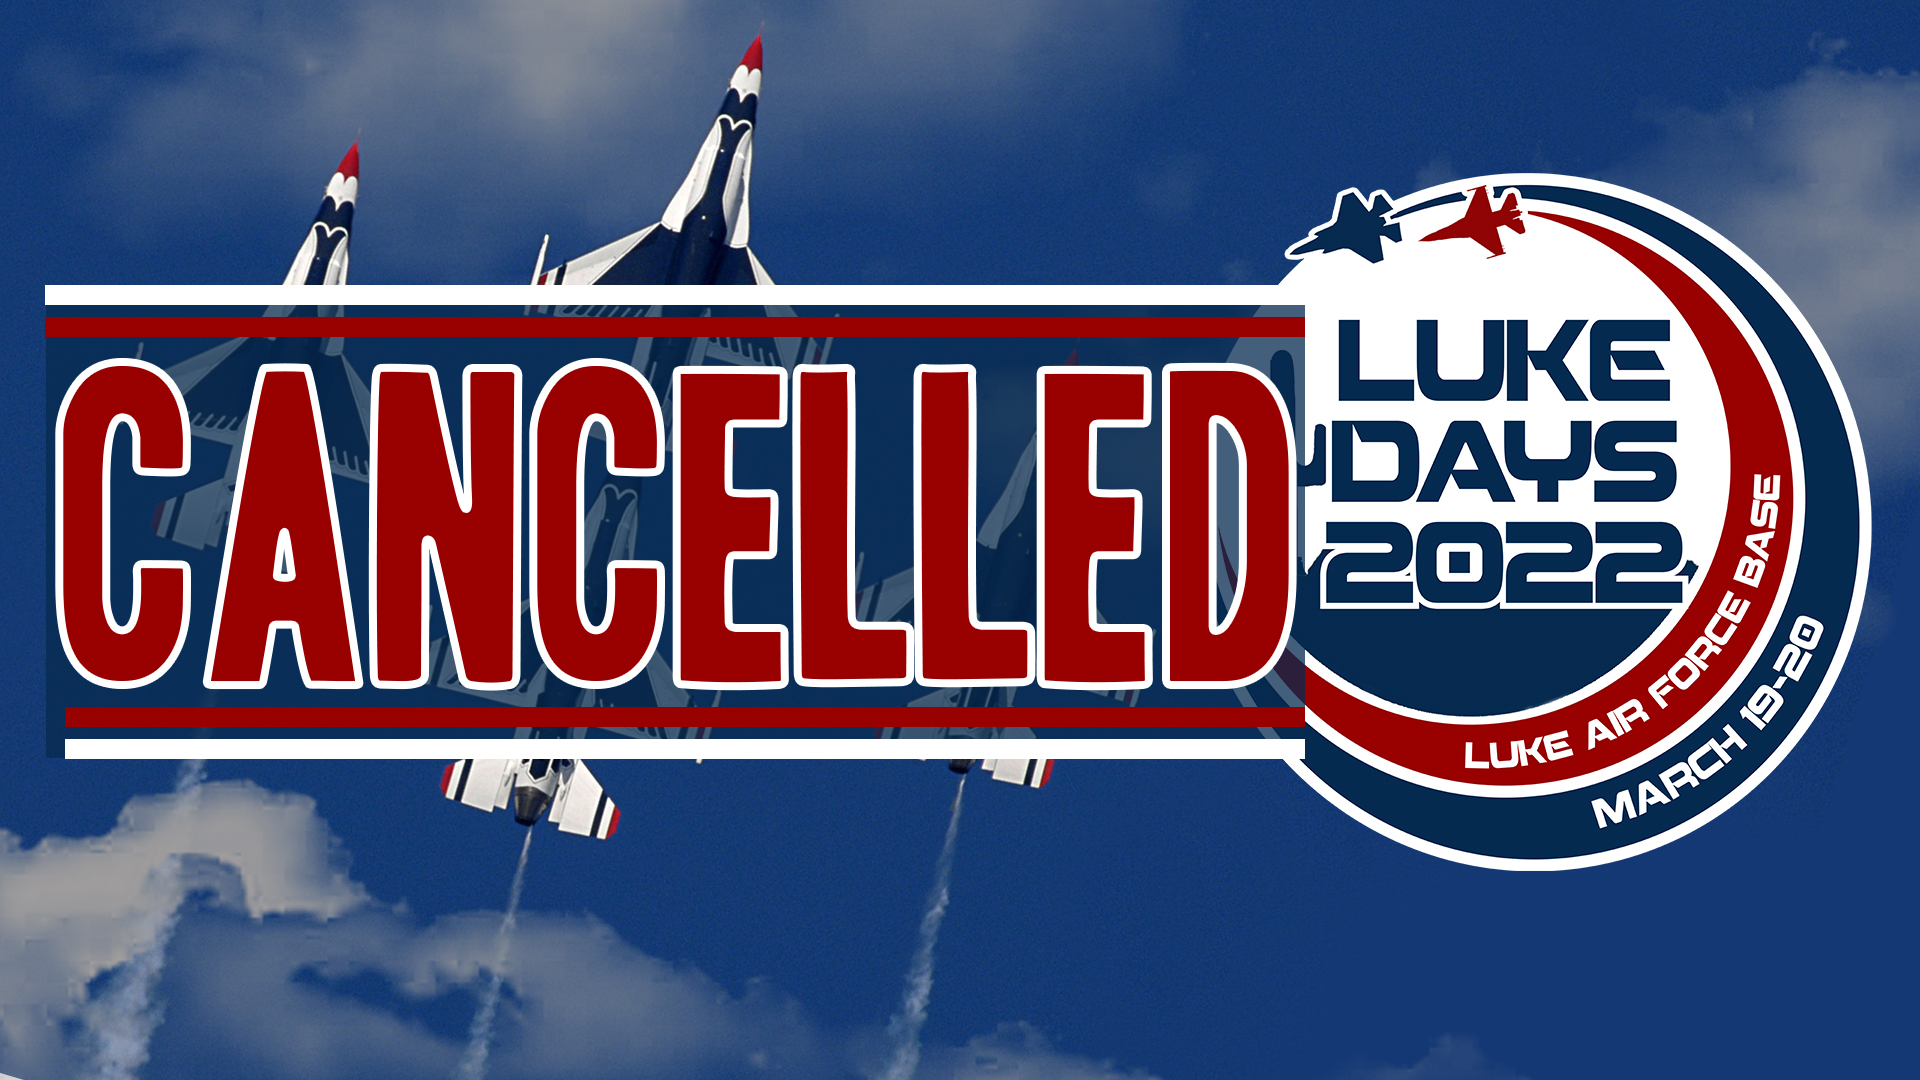 Luke Days 2022 Cancelled > Air Education and Training Command > Article